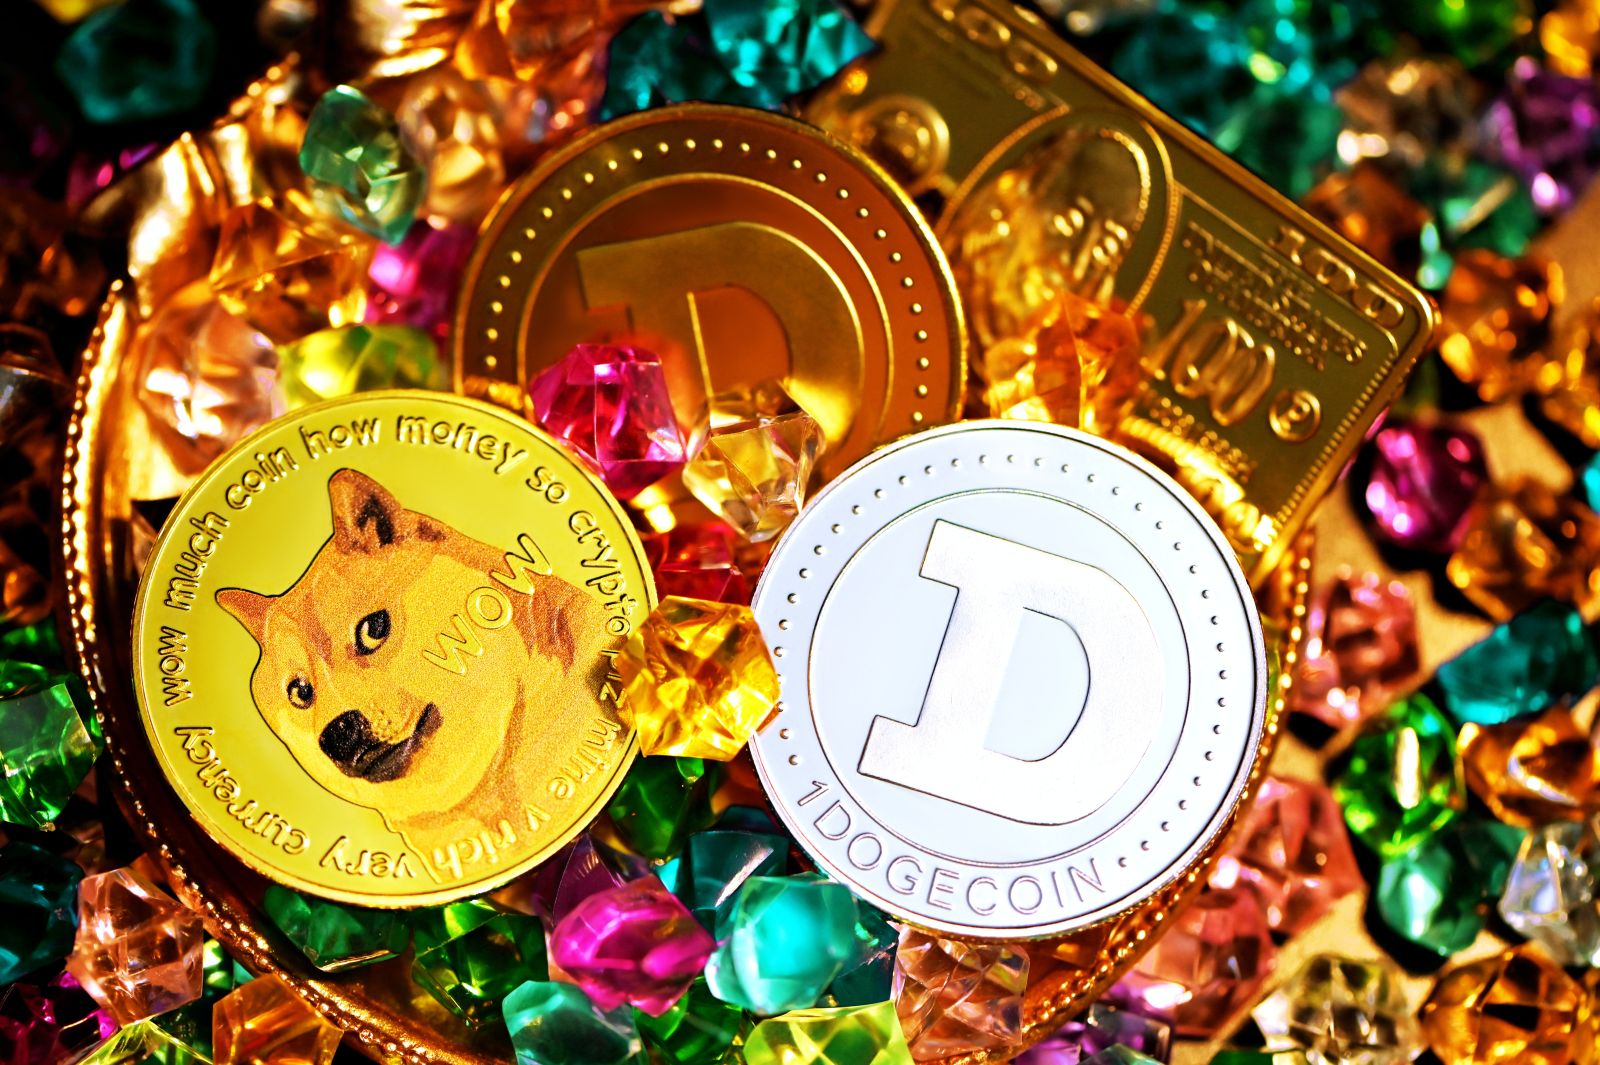 Crypto - Dogecoin Laying in Pile of Jewels